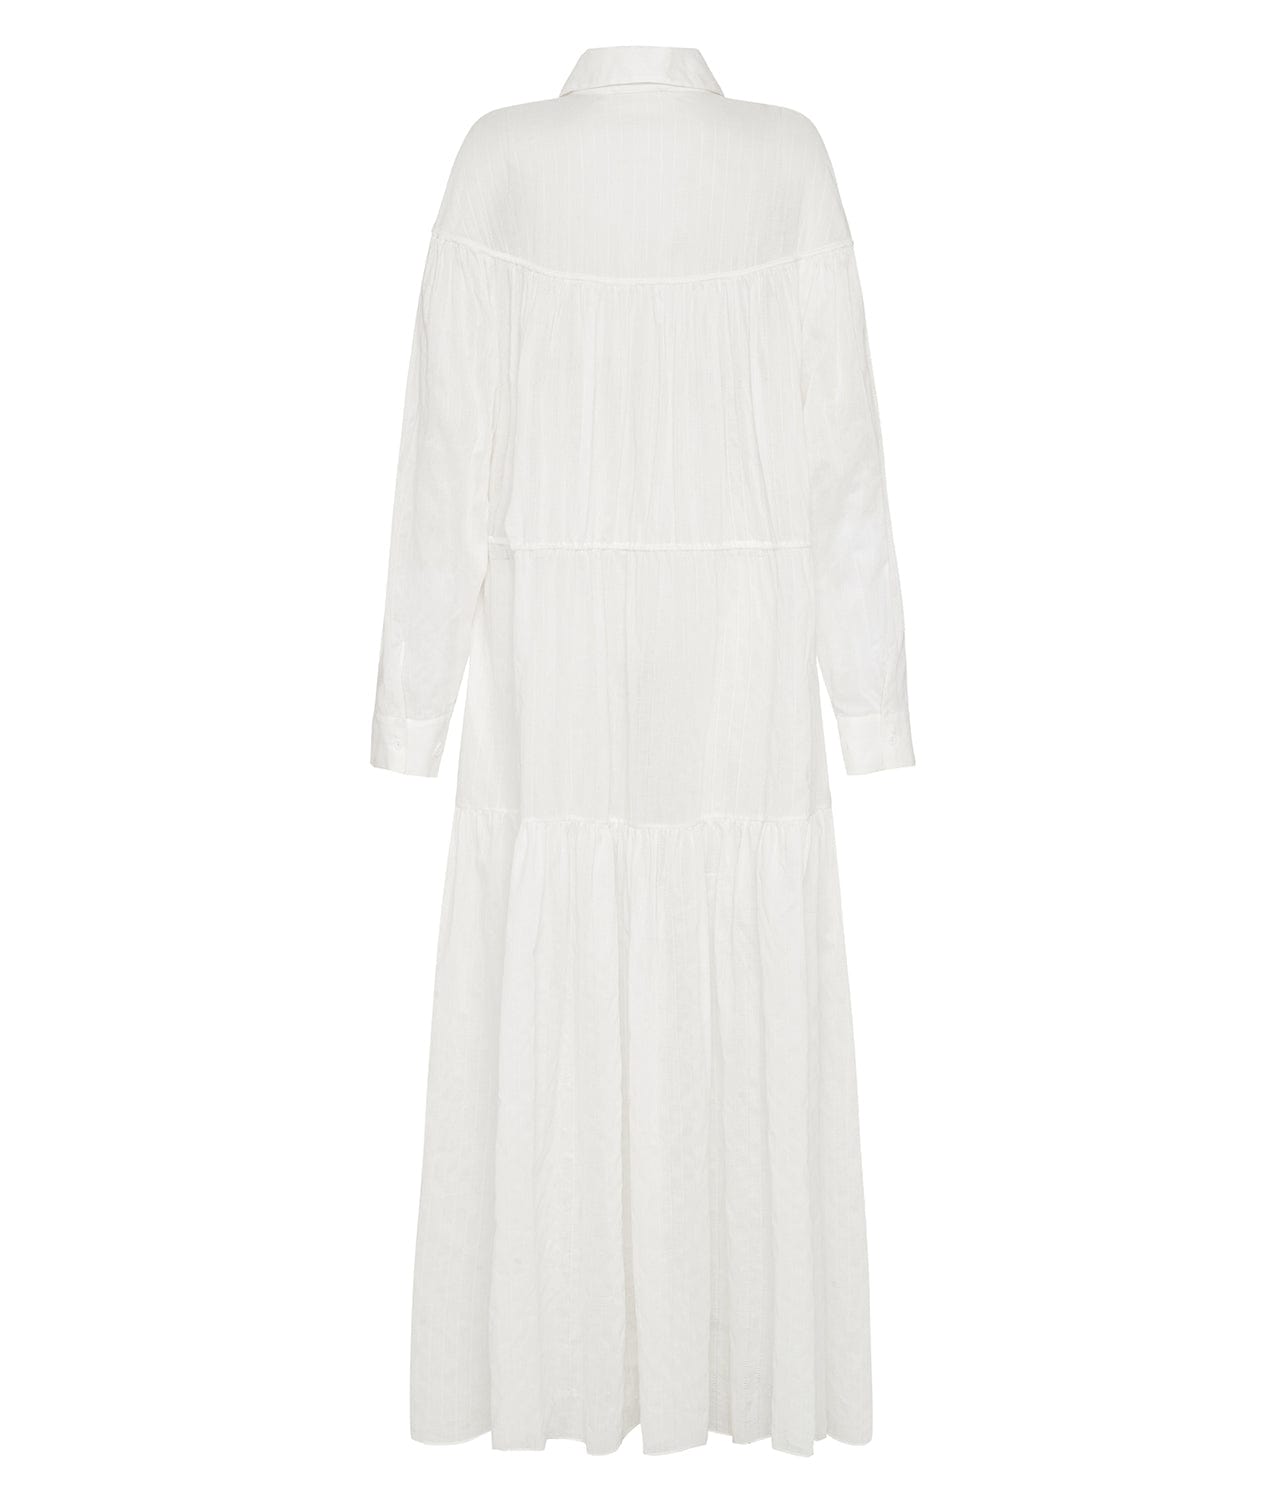 EMBROIDERED TIERED DRAWCORD DRESS- WHITE | MATTEAU |  MATTEAU EMBROIDERED TIERED DRAWCORD DRESS- WHITE